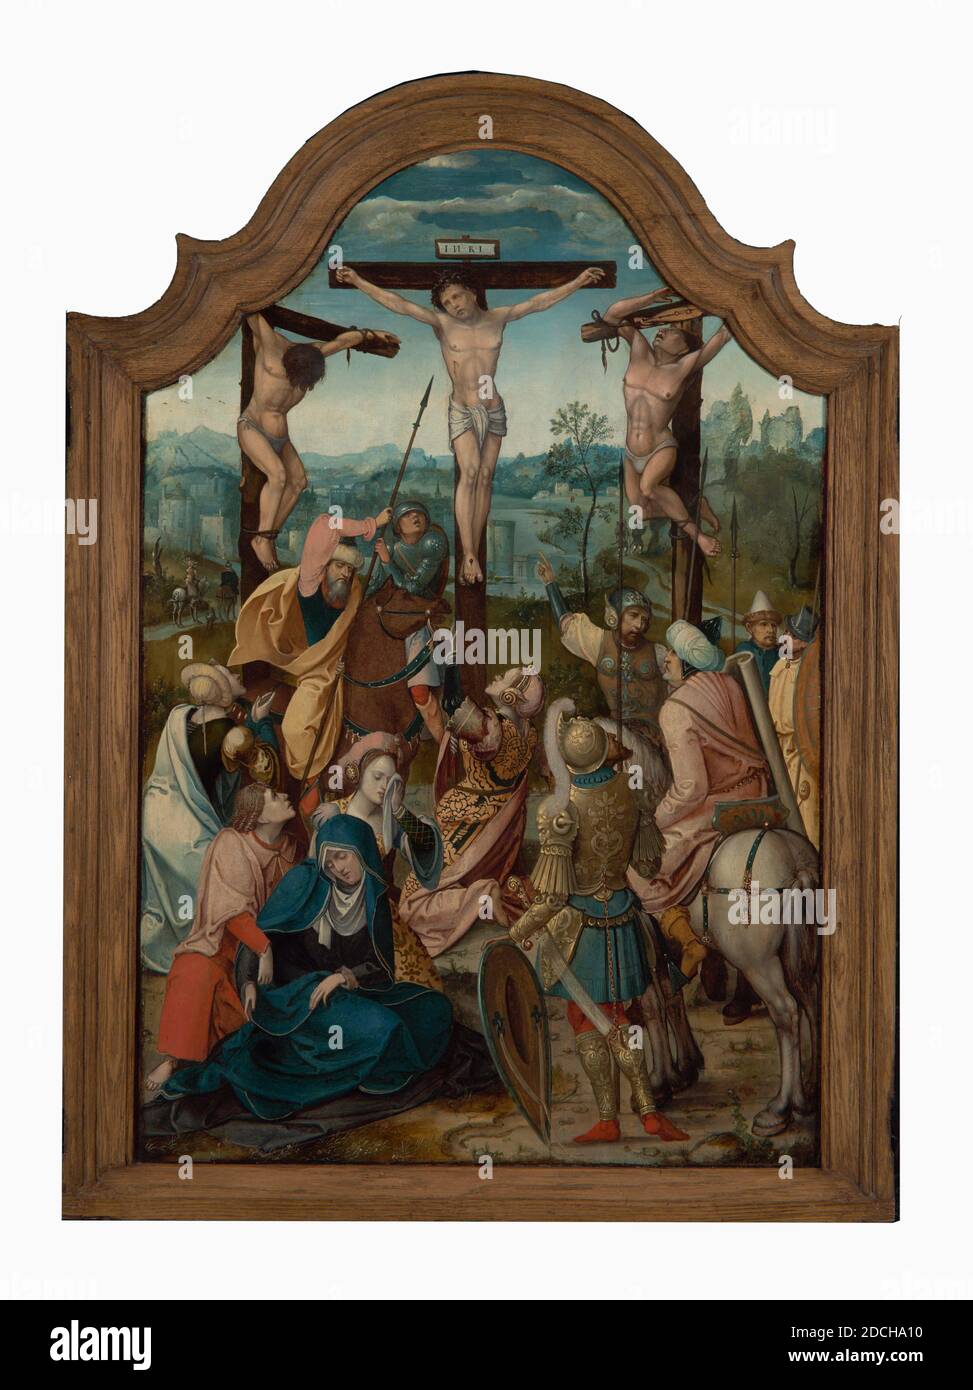 Anonymous, c. 1530, panel, oil paint, painted, Carrier: 108 × 71cm 1080 × 710mm, With frame with hanging ring: 125.5 × 86 × 4cm 1255 × 860 × 40mm, horseman, landscape, soldier, biblical representation, maria magdalena , mary, christ, cross, Central panel of a triptych with a biblical representation: the crucifixion of Christ. In the center, Christ hangs on the cross, head to the left. On both sides, the two culprits hang from the cross, the left one lowering the head and the right raising the head. To the left of the cross is a warrior who helped blind Longinus, seated on a brown horse, to Stock Photo